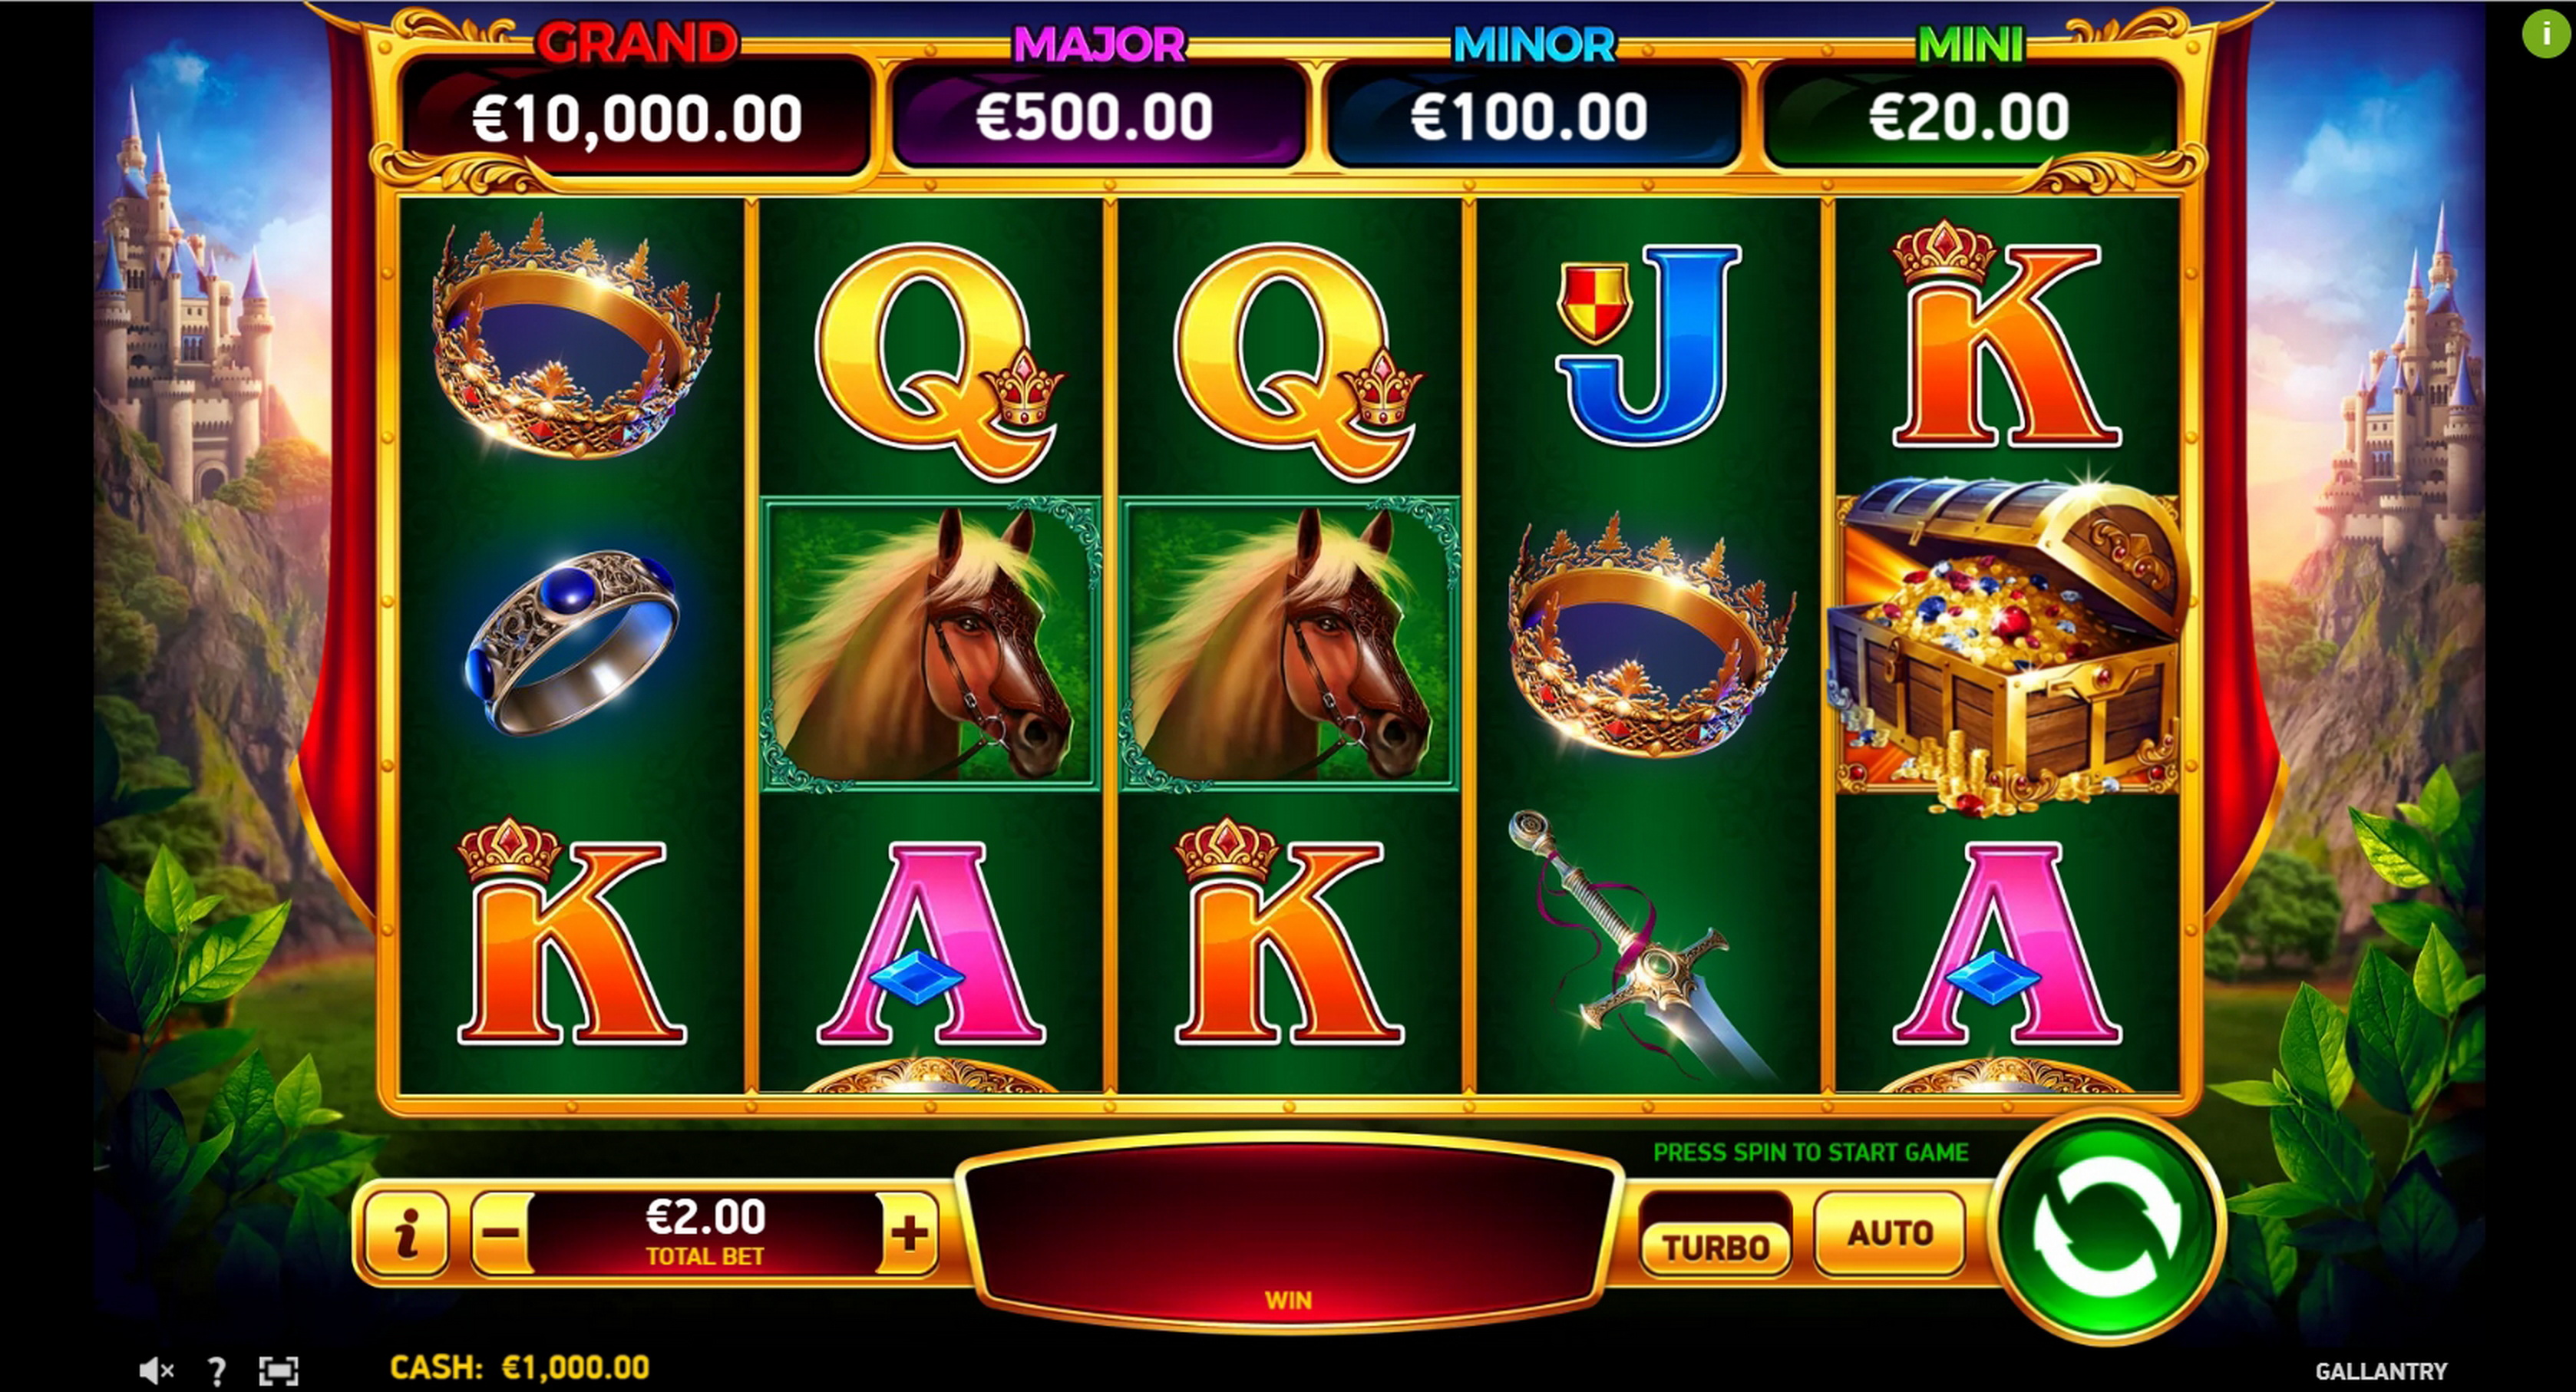 Reels in Gallantry Slot Game by Ruby Play